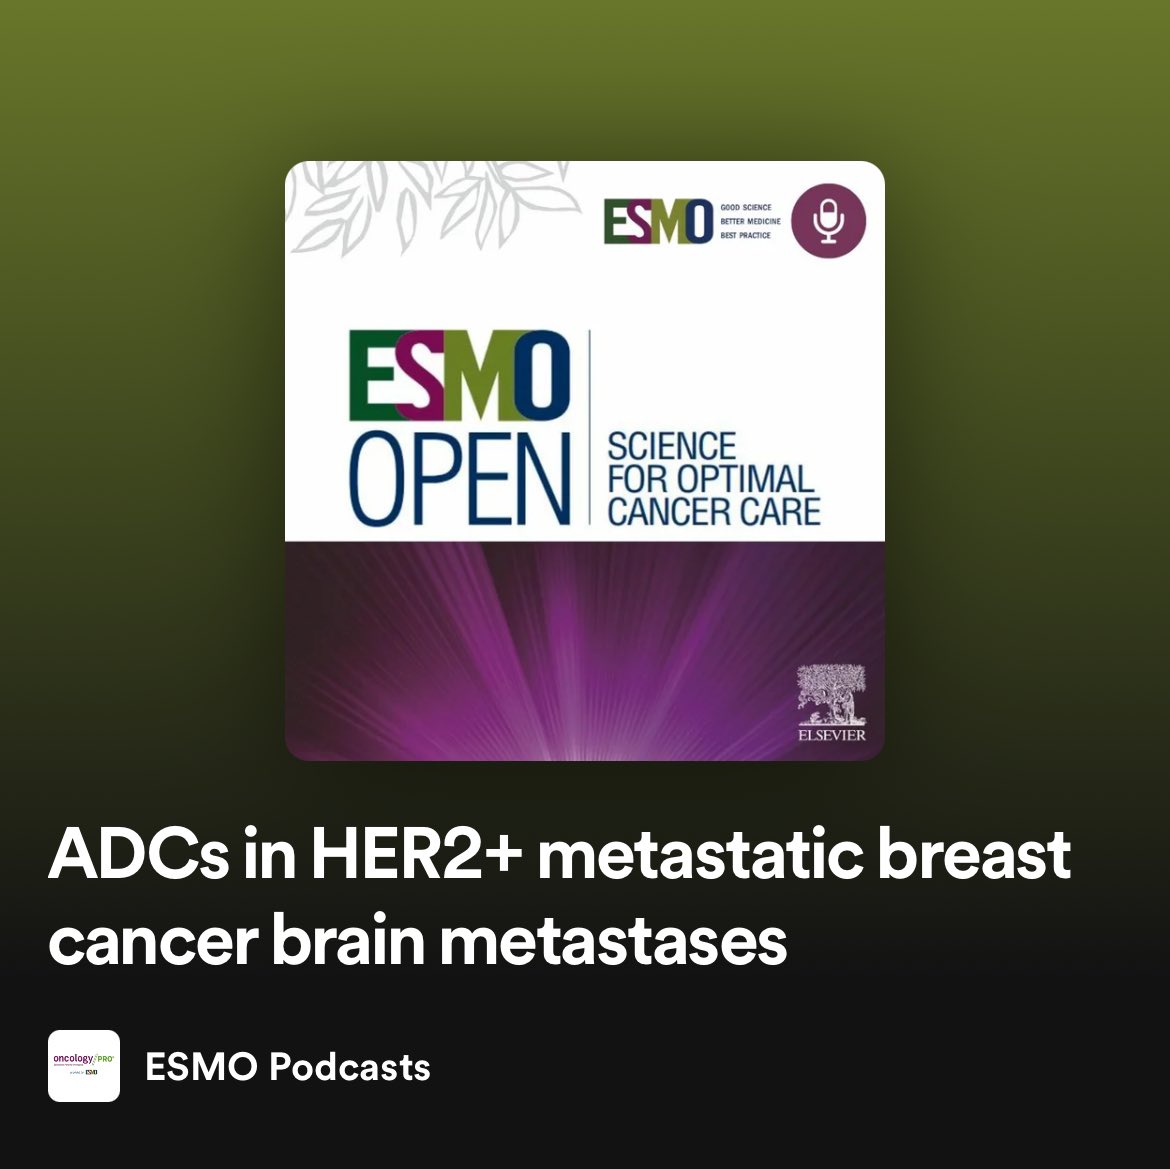 Impressive intracranial activity of both T-DXd (65%) and T-DM1 (34%) for HER2+ brain metastases. 🎙️ Don’t miss the accompanying podcast, where @curijoey and I had the opportunity to interview Sara Hurvitz and @nlinmd to discuss the results. Spotify Link: open.spotify.com/episode/2JO8wQ…